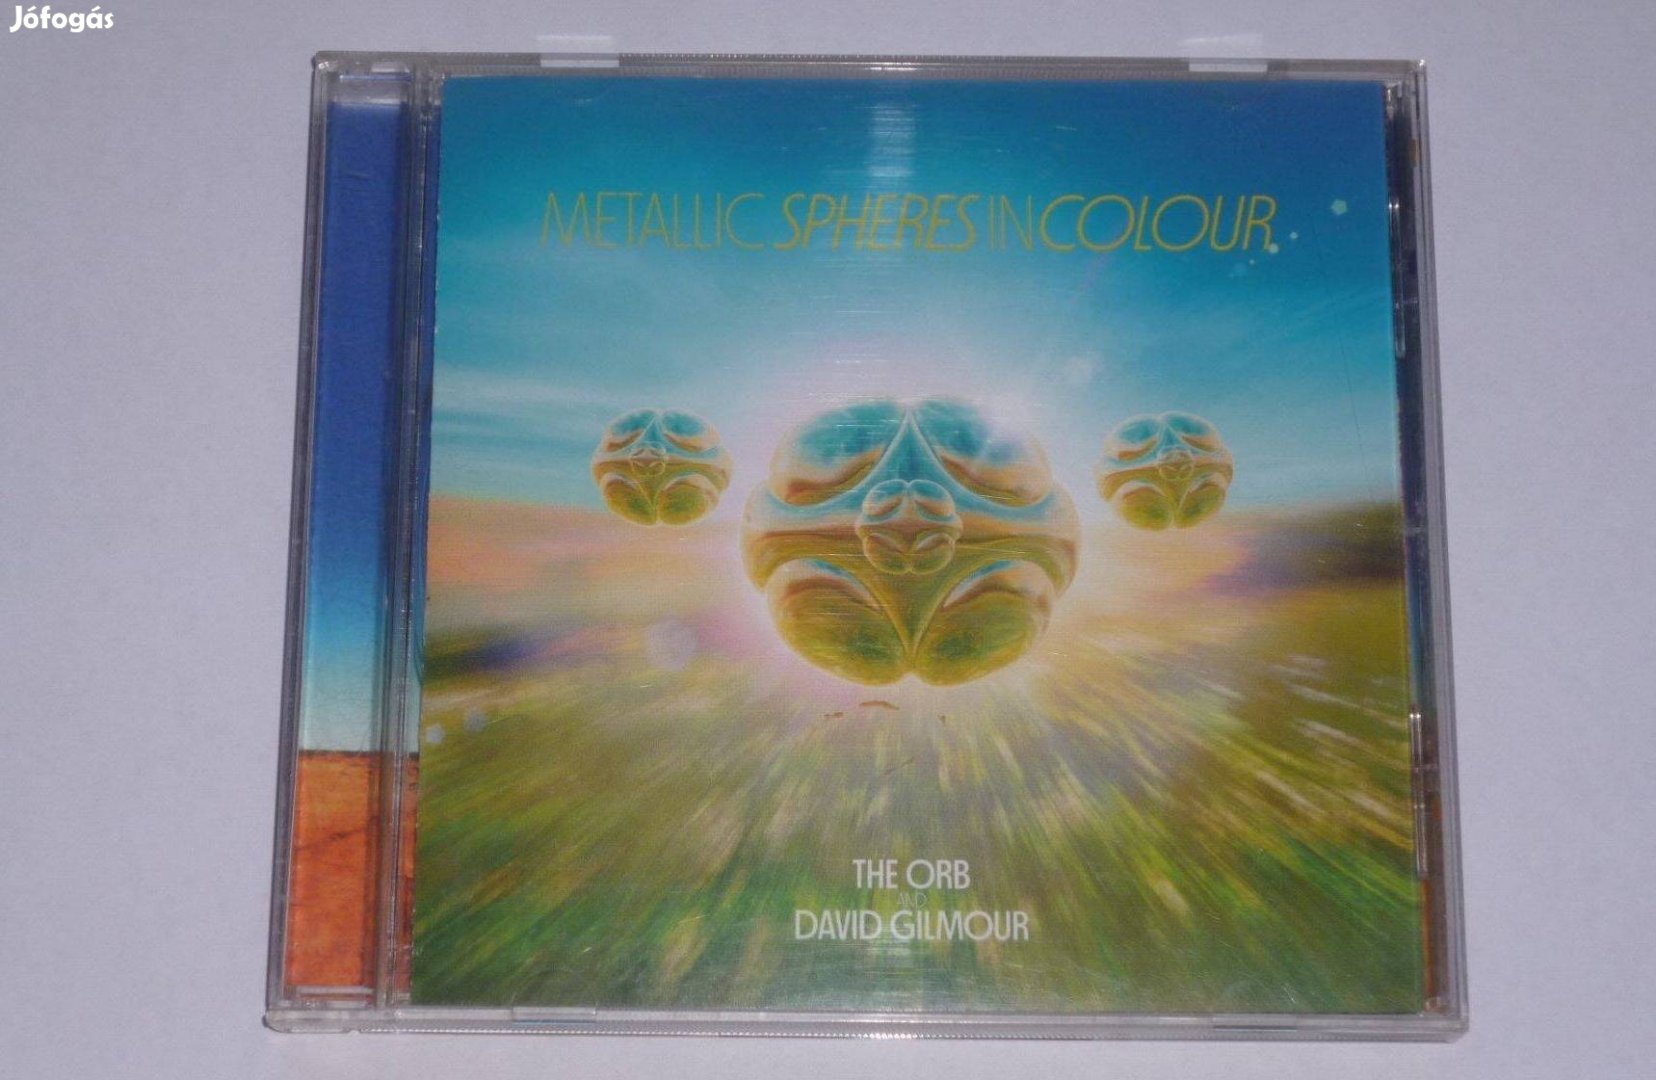 The Orb And David Gilmour - Metallic Spheres In Colour CD